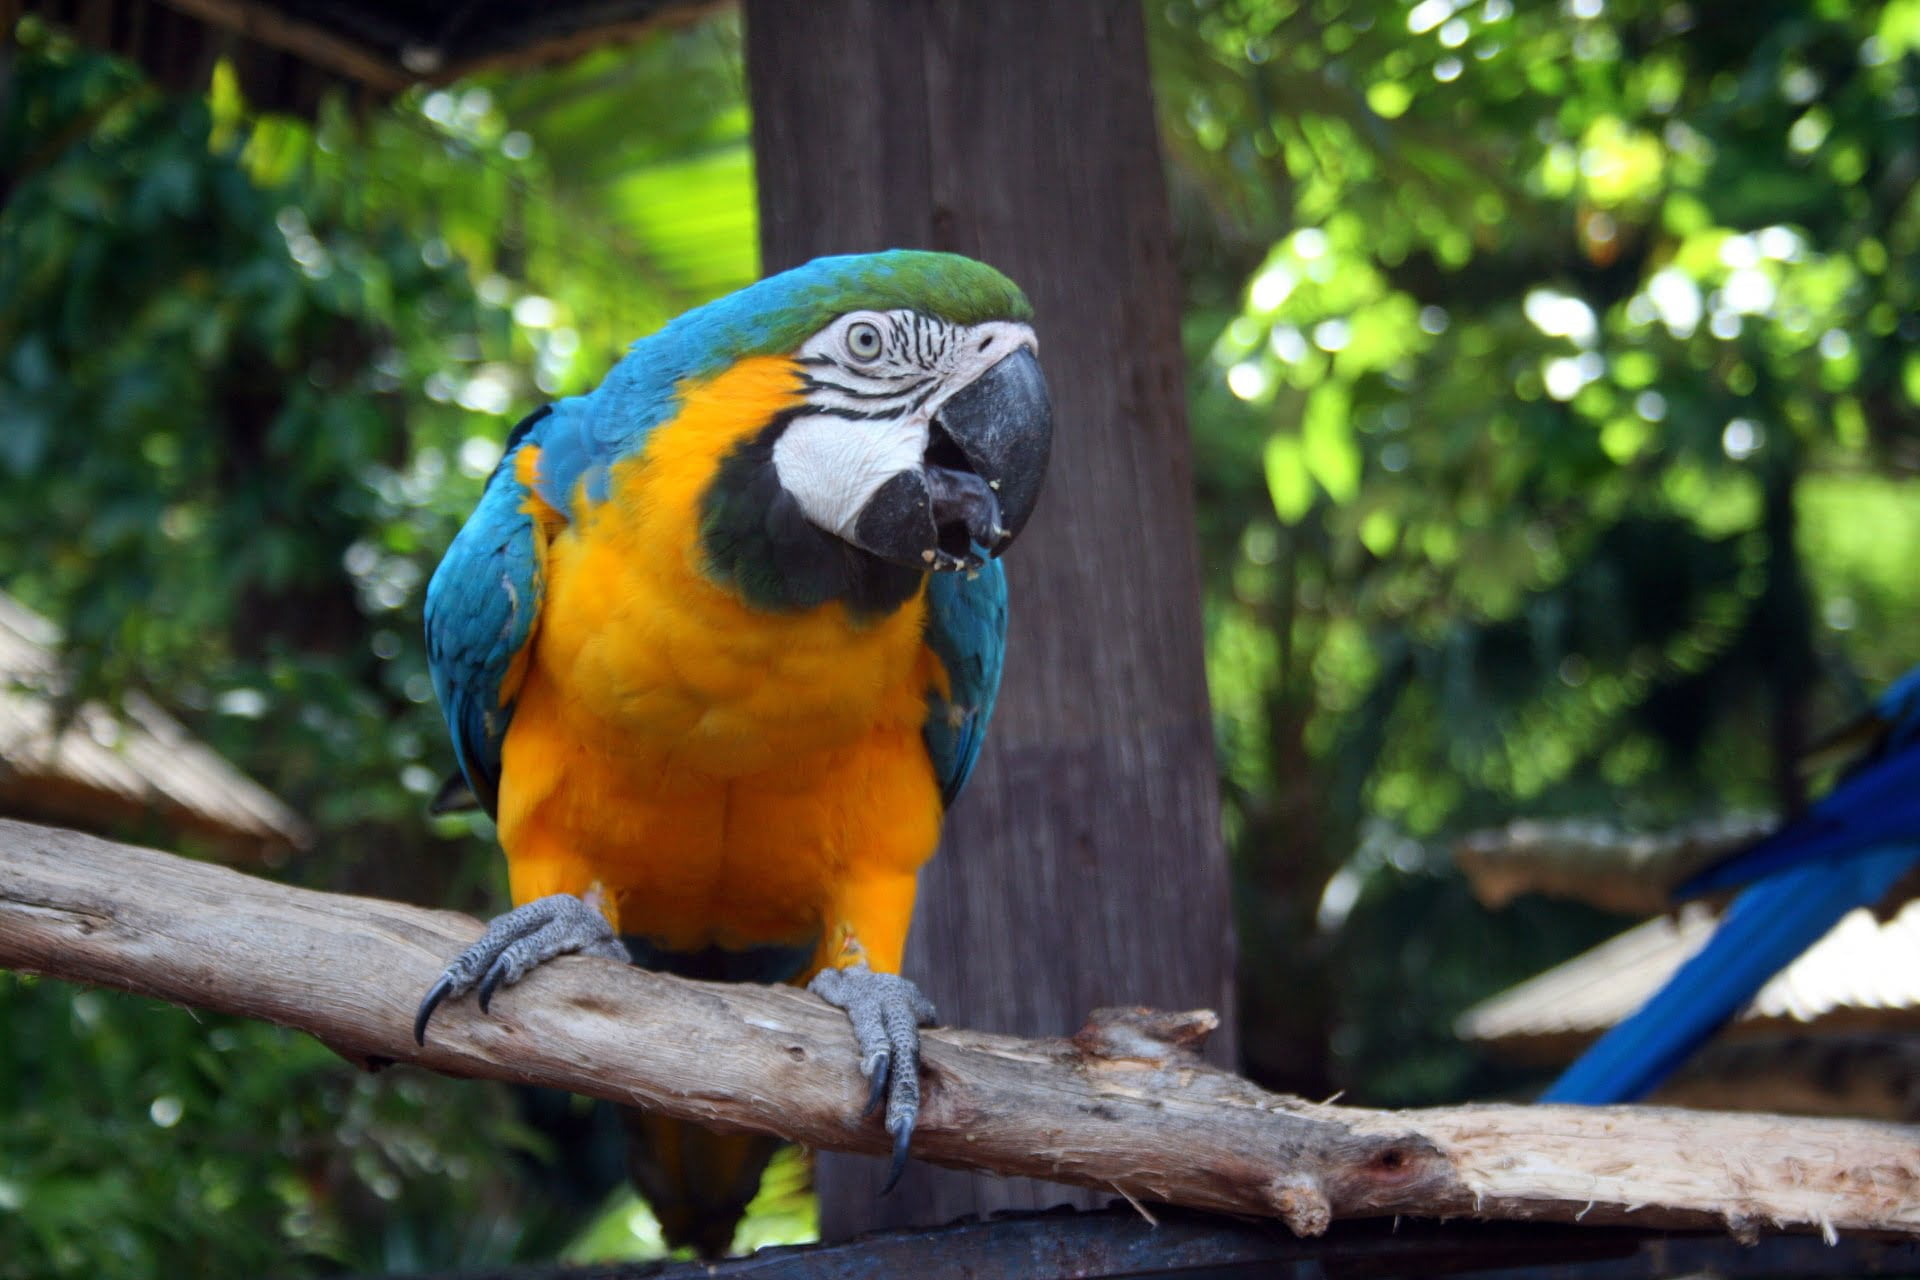 yellow-and-blue-macaw-parrot-4